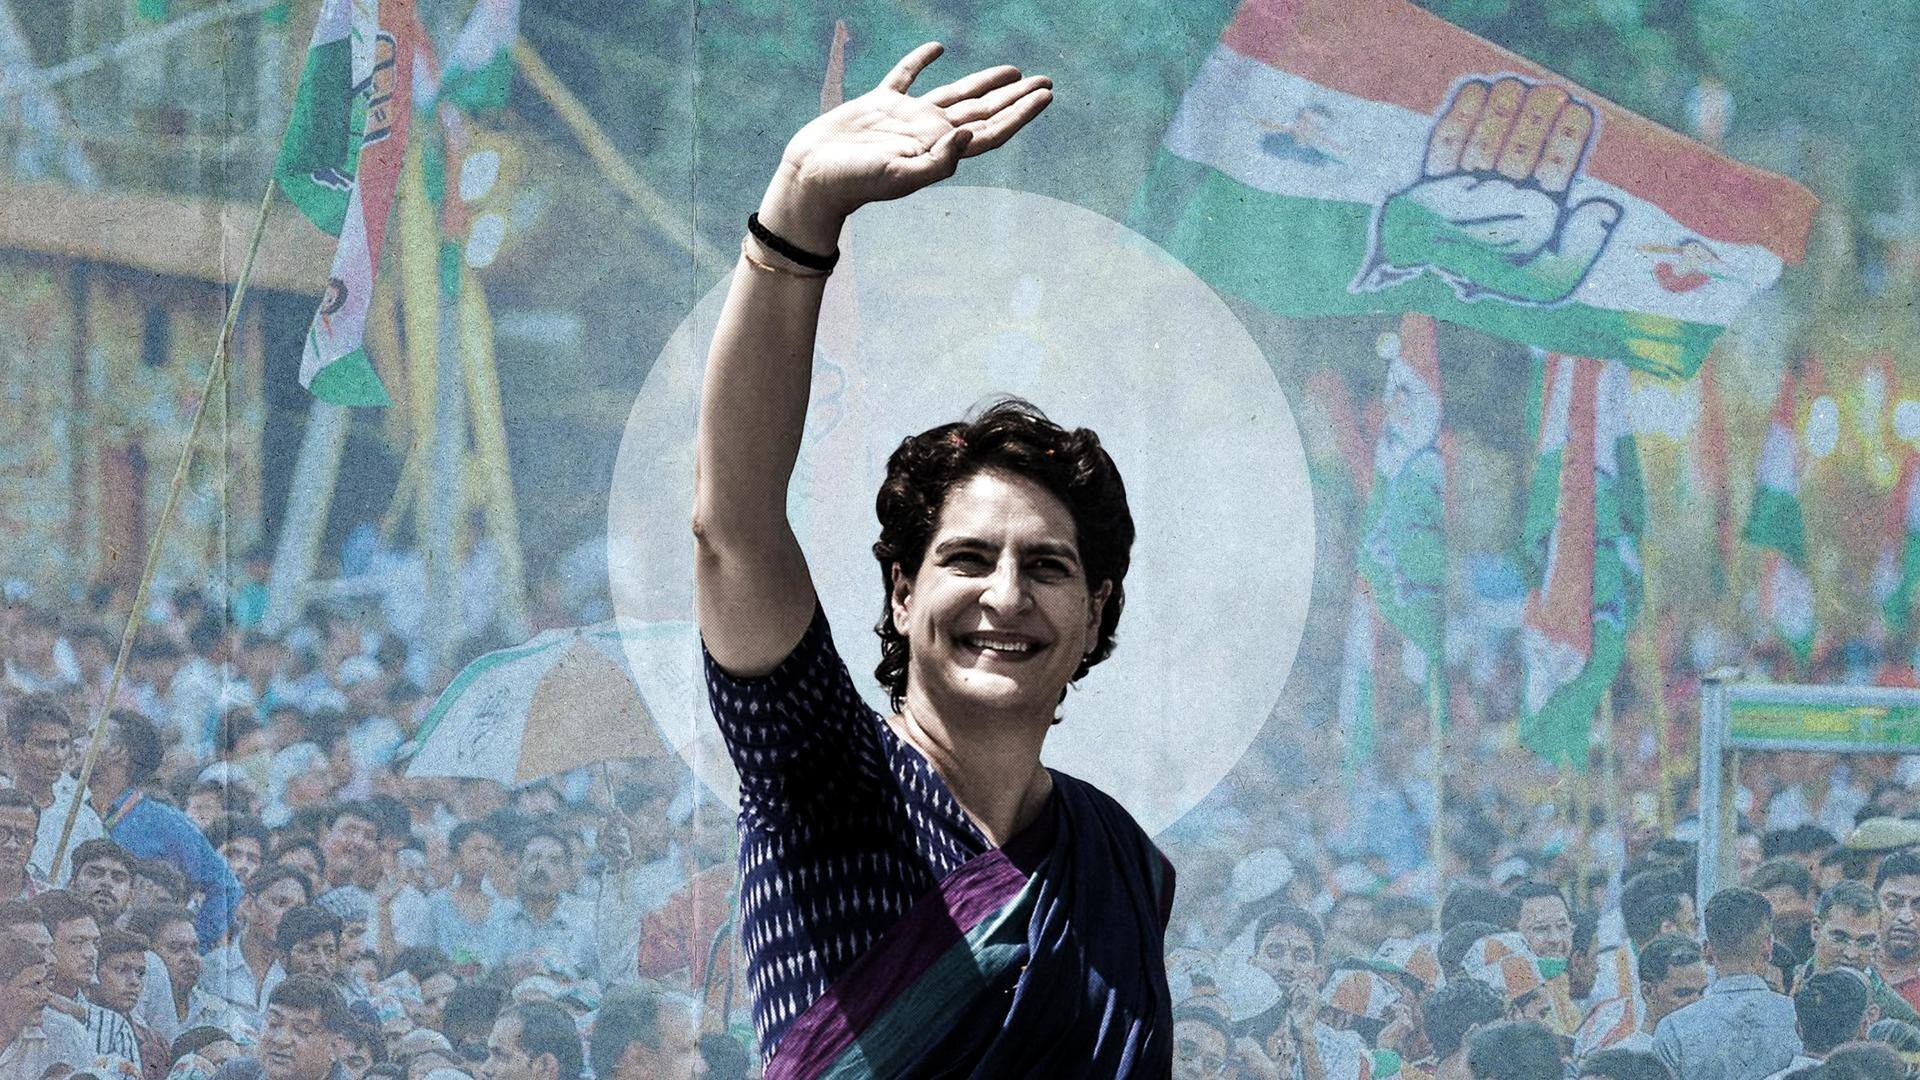 Priyanka to leave UP Congress leadership for national role: Reports